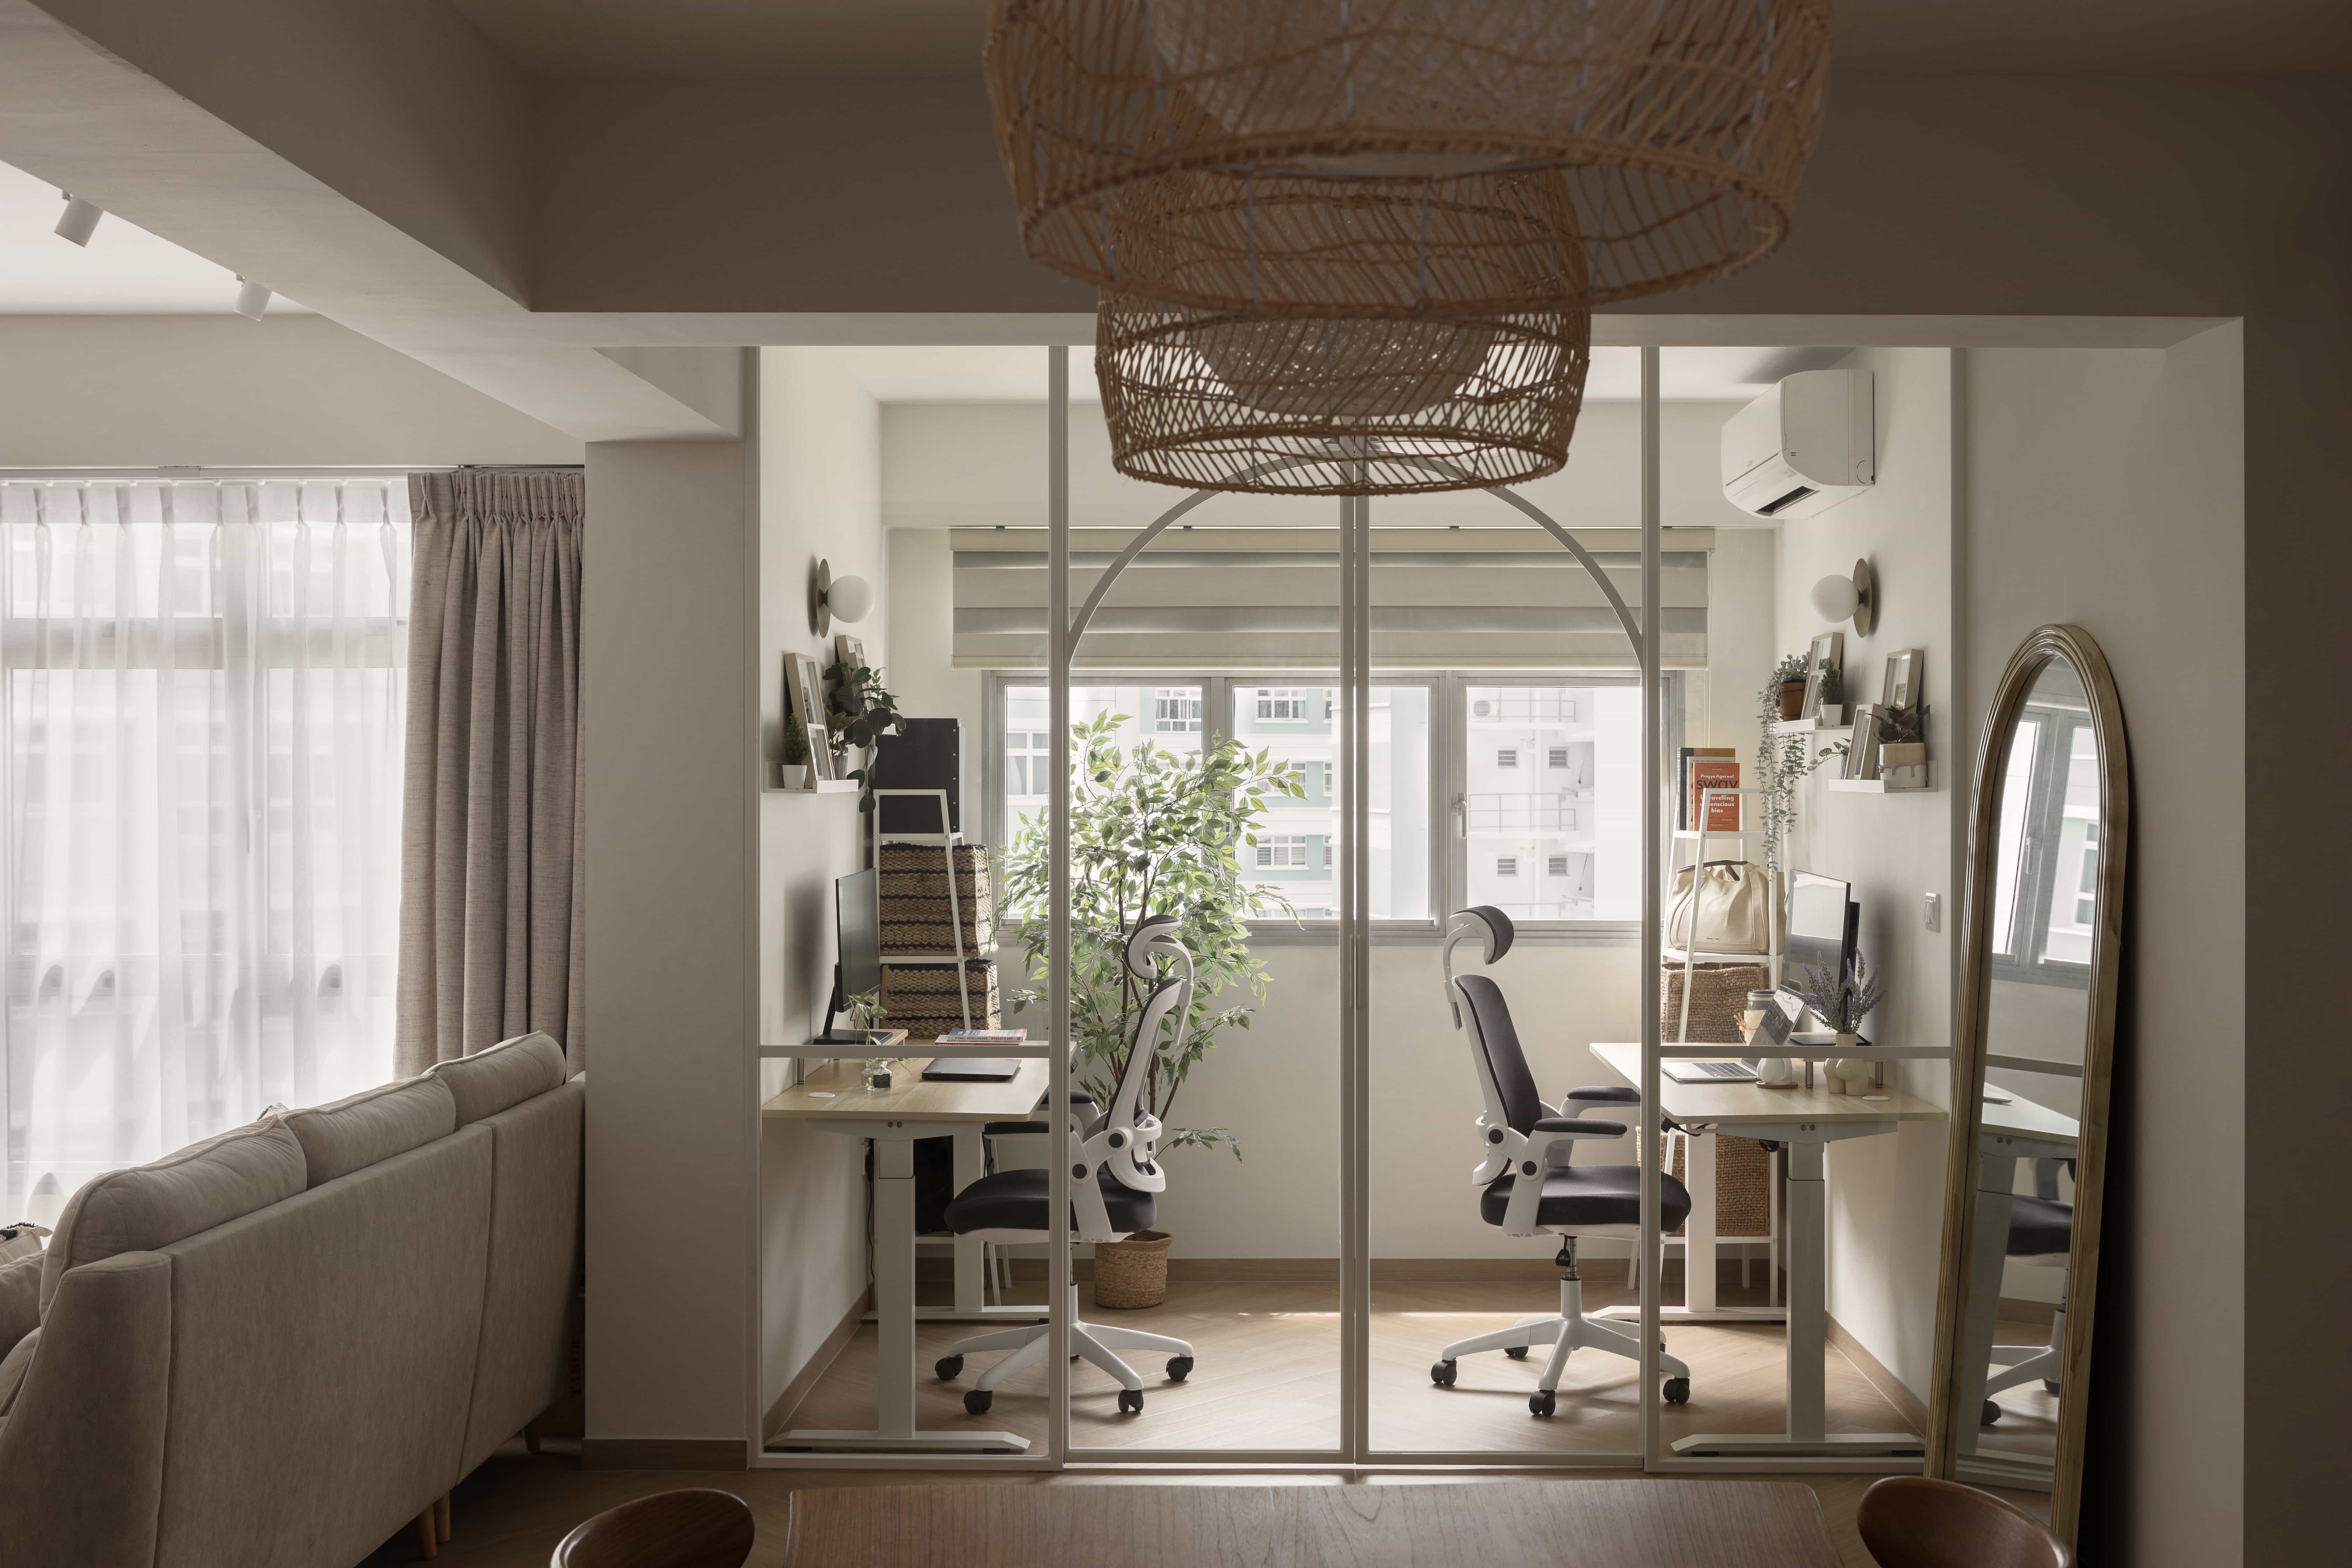 Stylish home office setup with ergonomic furniture and natural lighting.